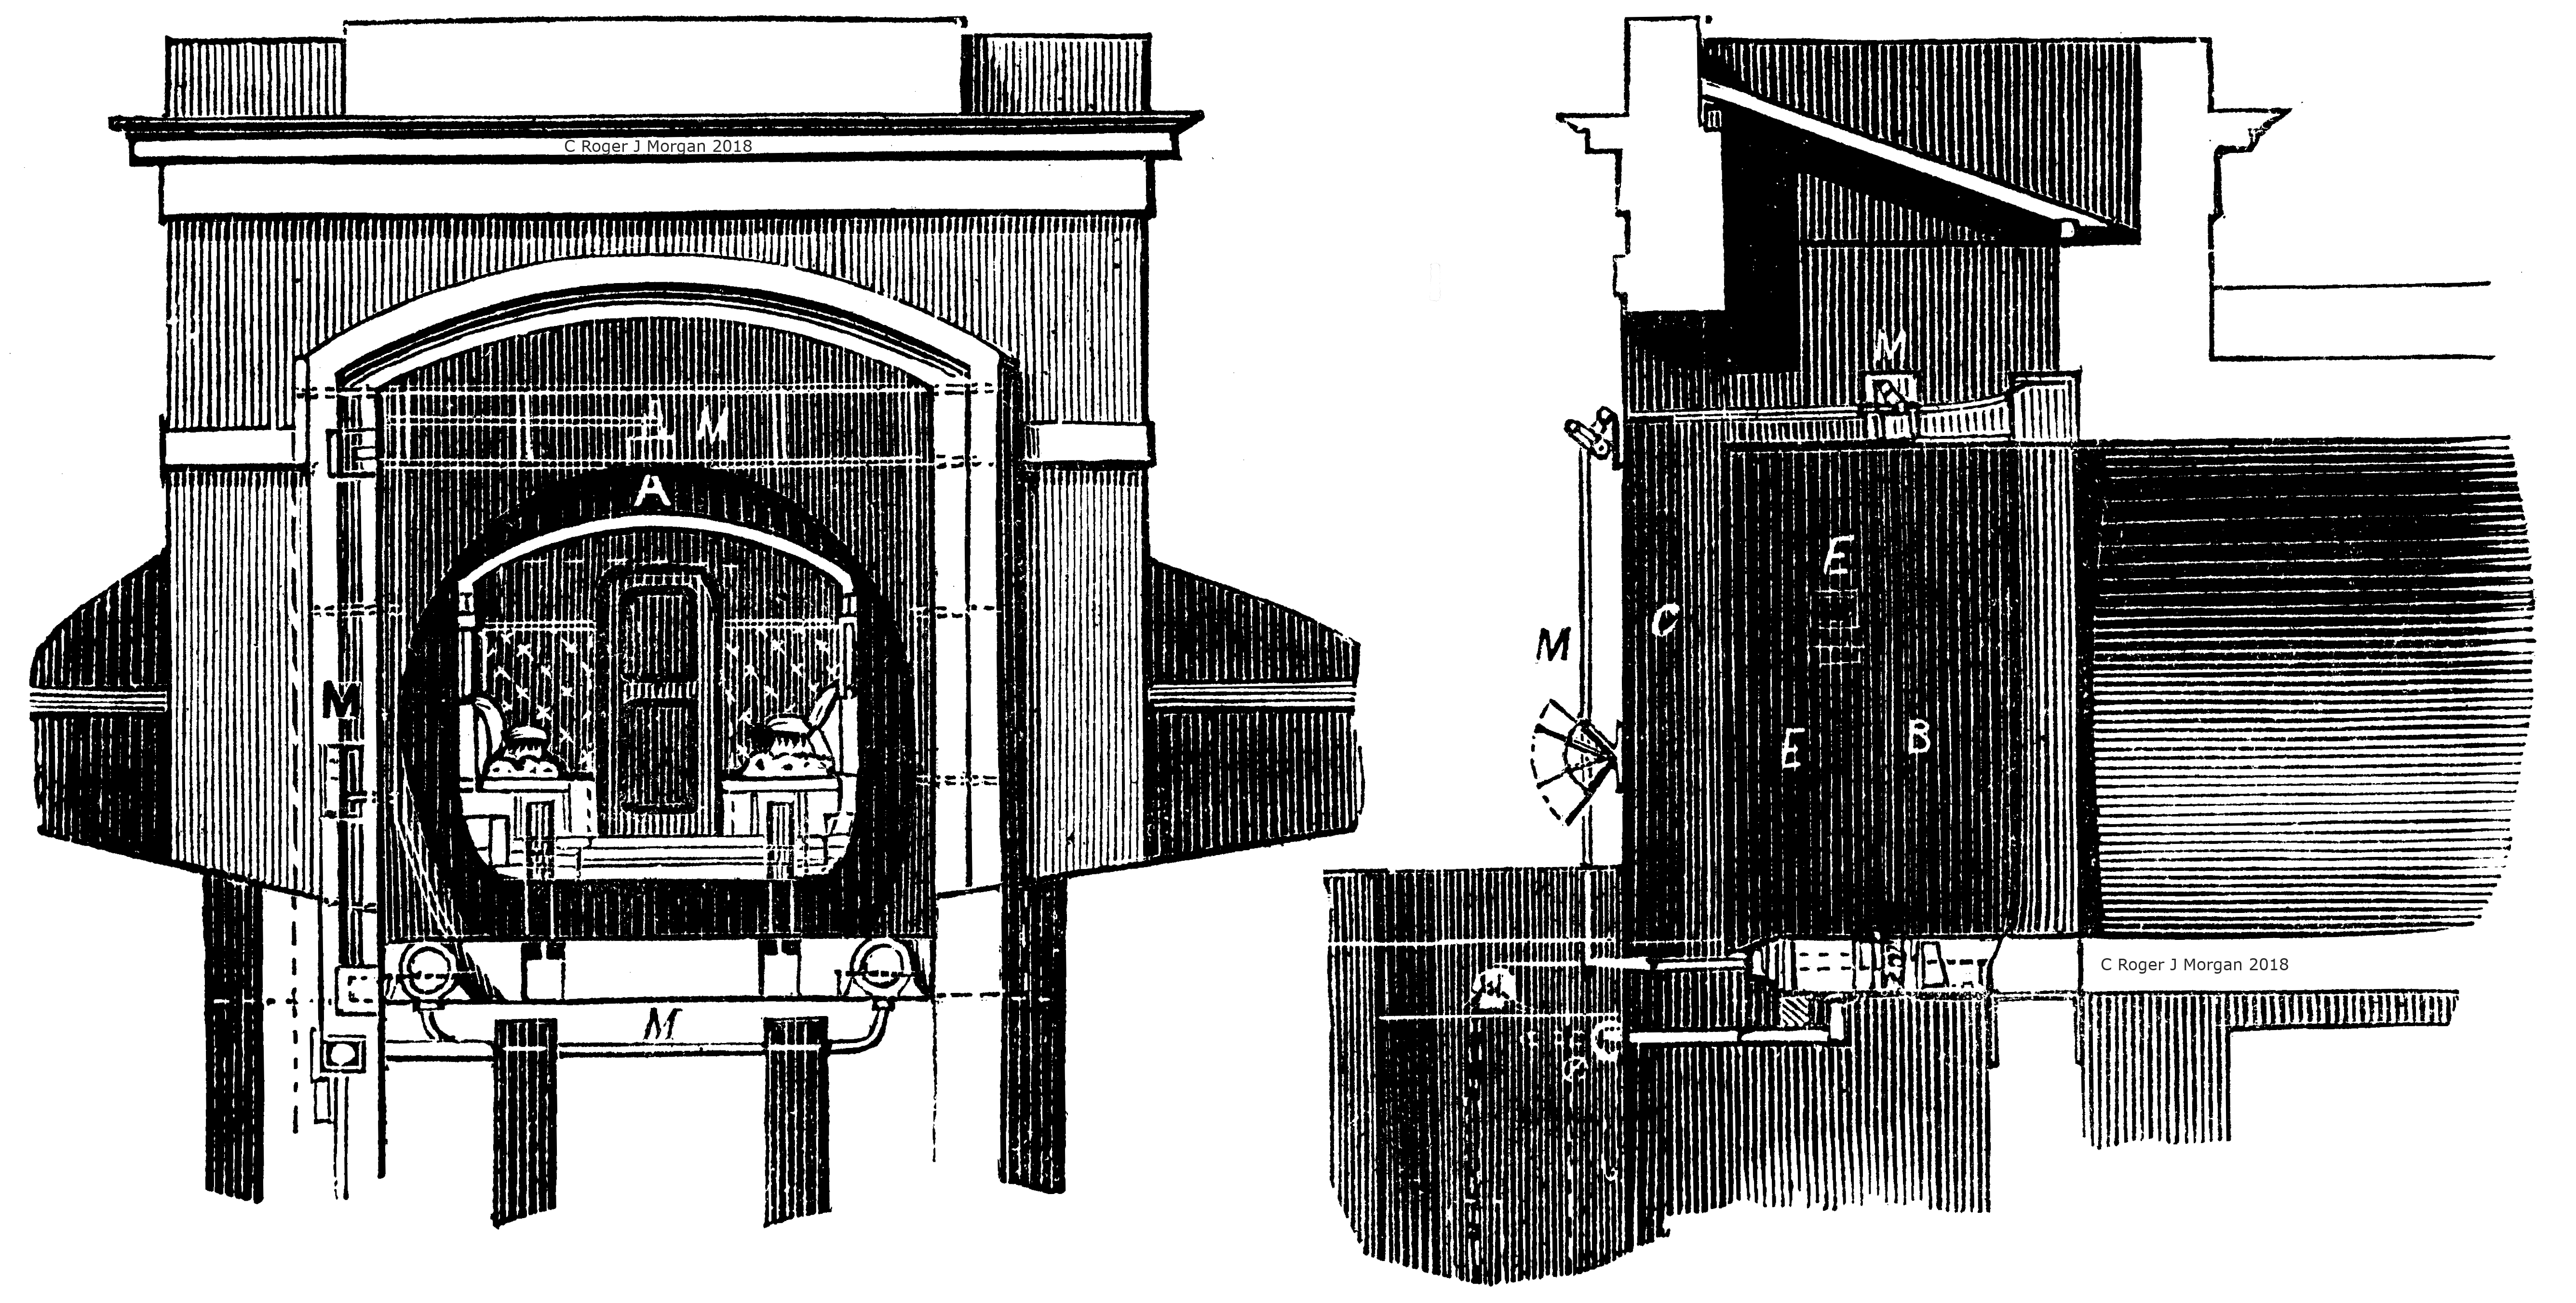 Rammell's patent drawing of the upper portal of the Crystal Palace Pneumatic Railway